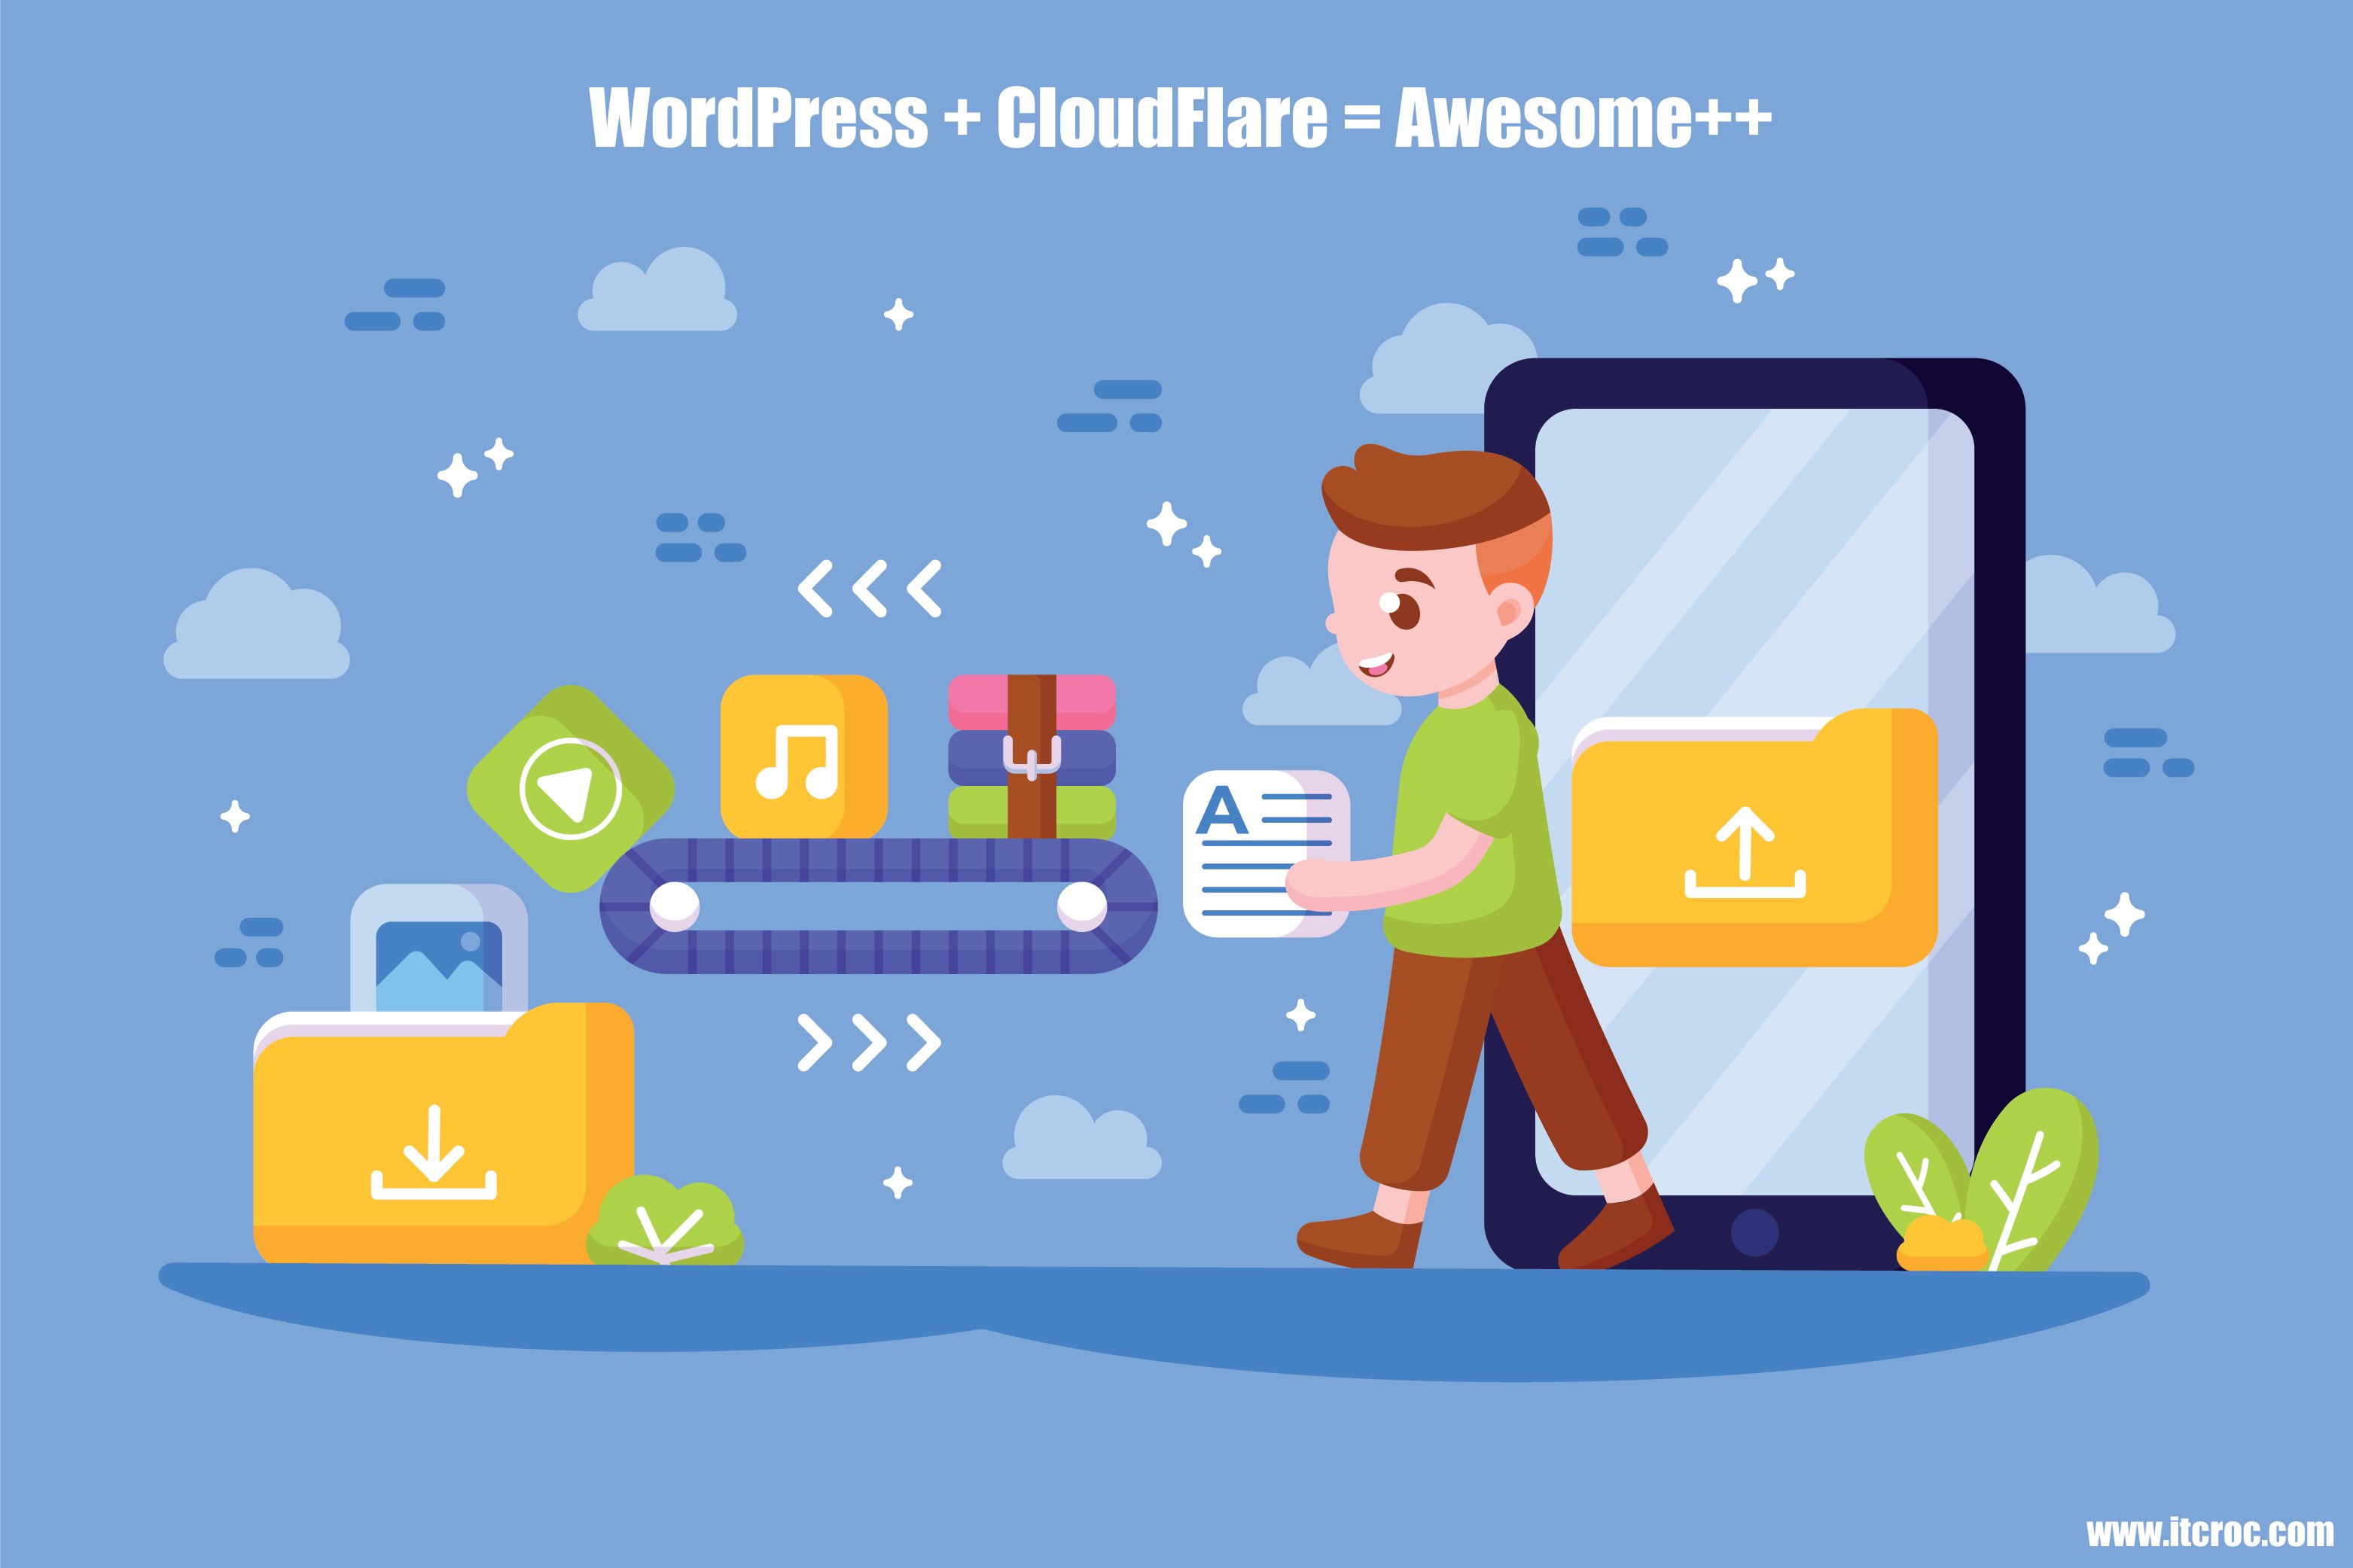 Boost Your WordPress Site's Performance with Cloudflare CDN Integration